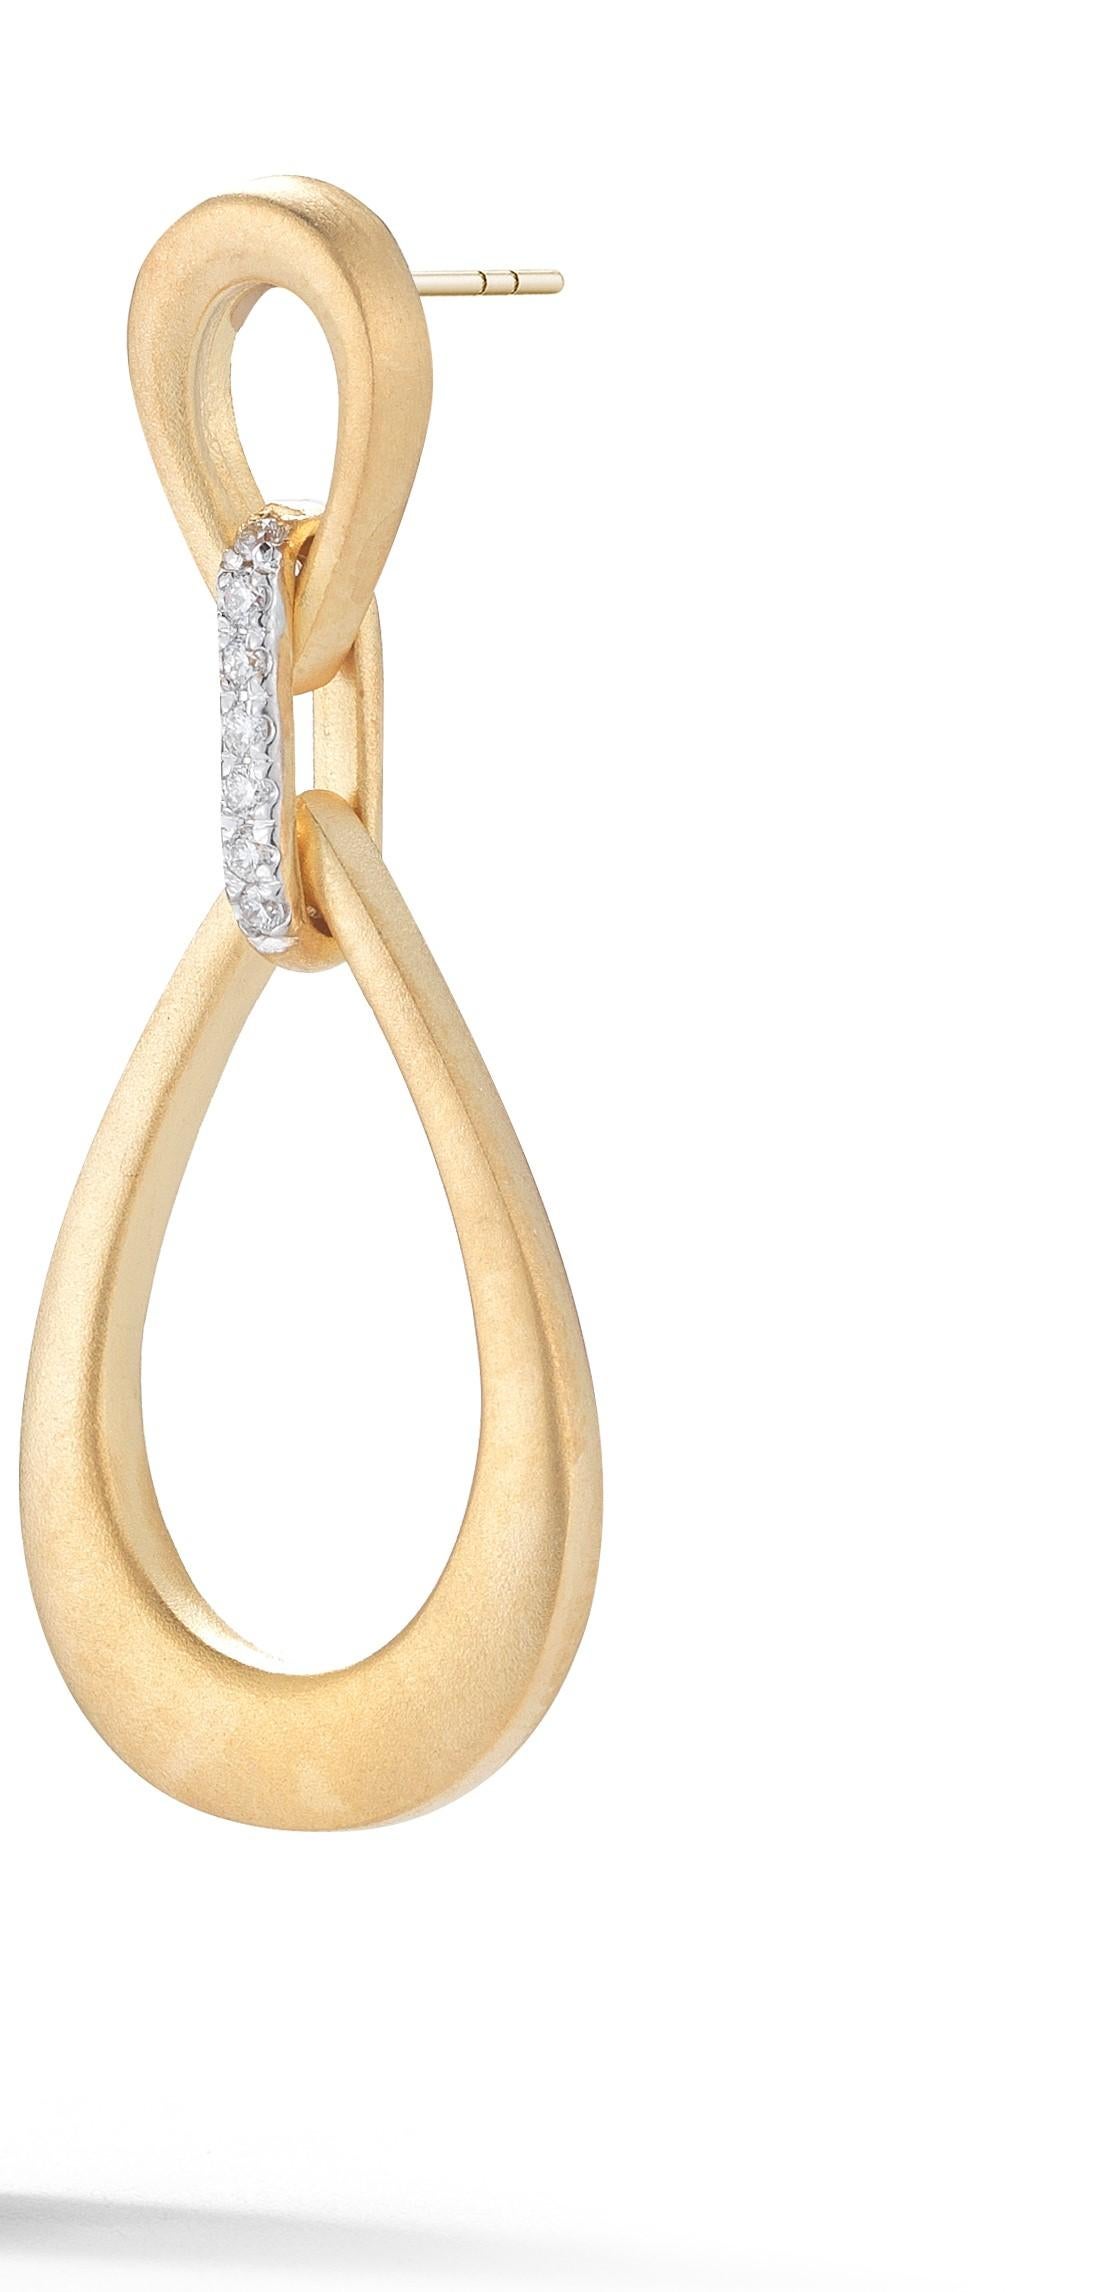 14 Karat Yellow Gold Hand-Crafted Satin Finish Small-Large Diamond Linked Open Tear-Drop Dangling Earrings, Set with 0.14 Carat Diamonds on a Post-with-Friction Back Finding.
